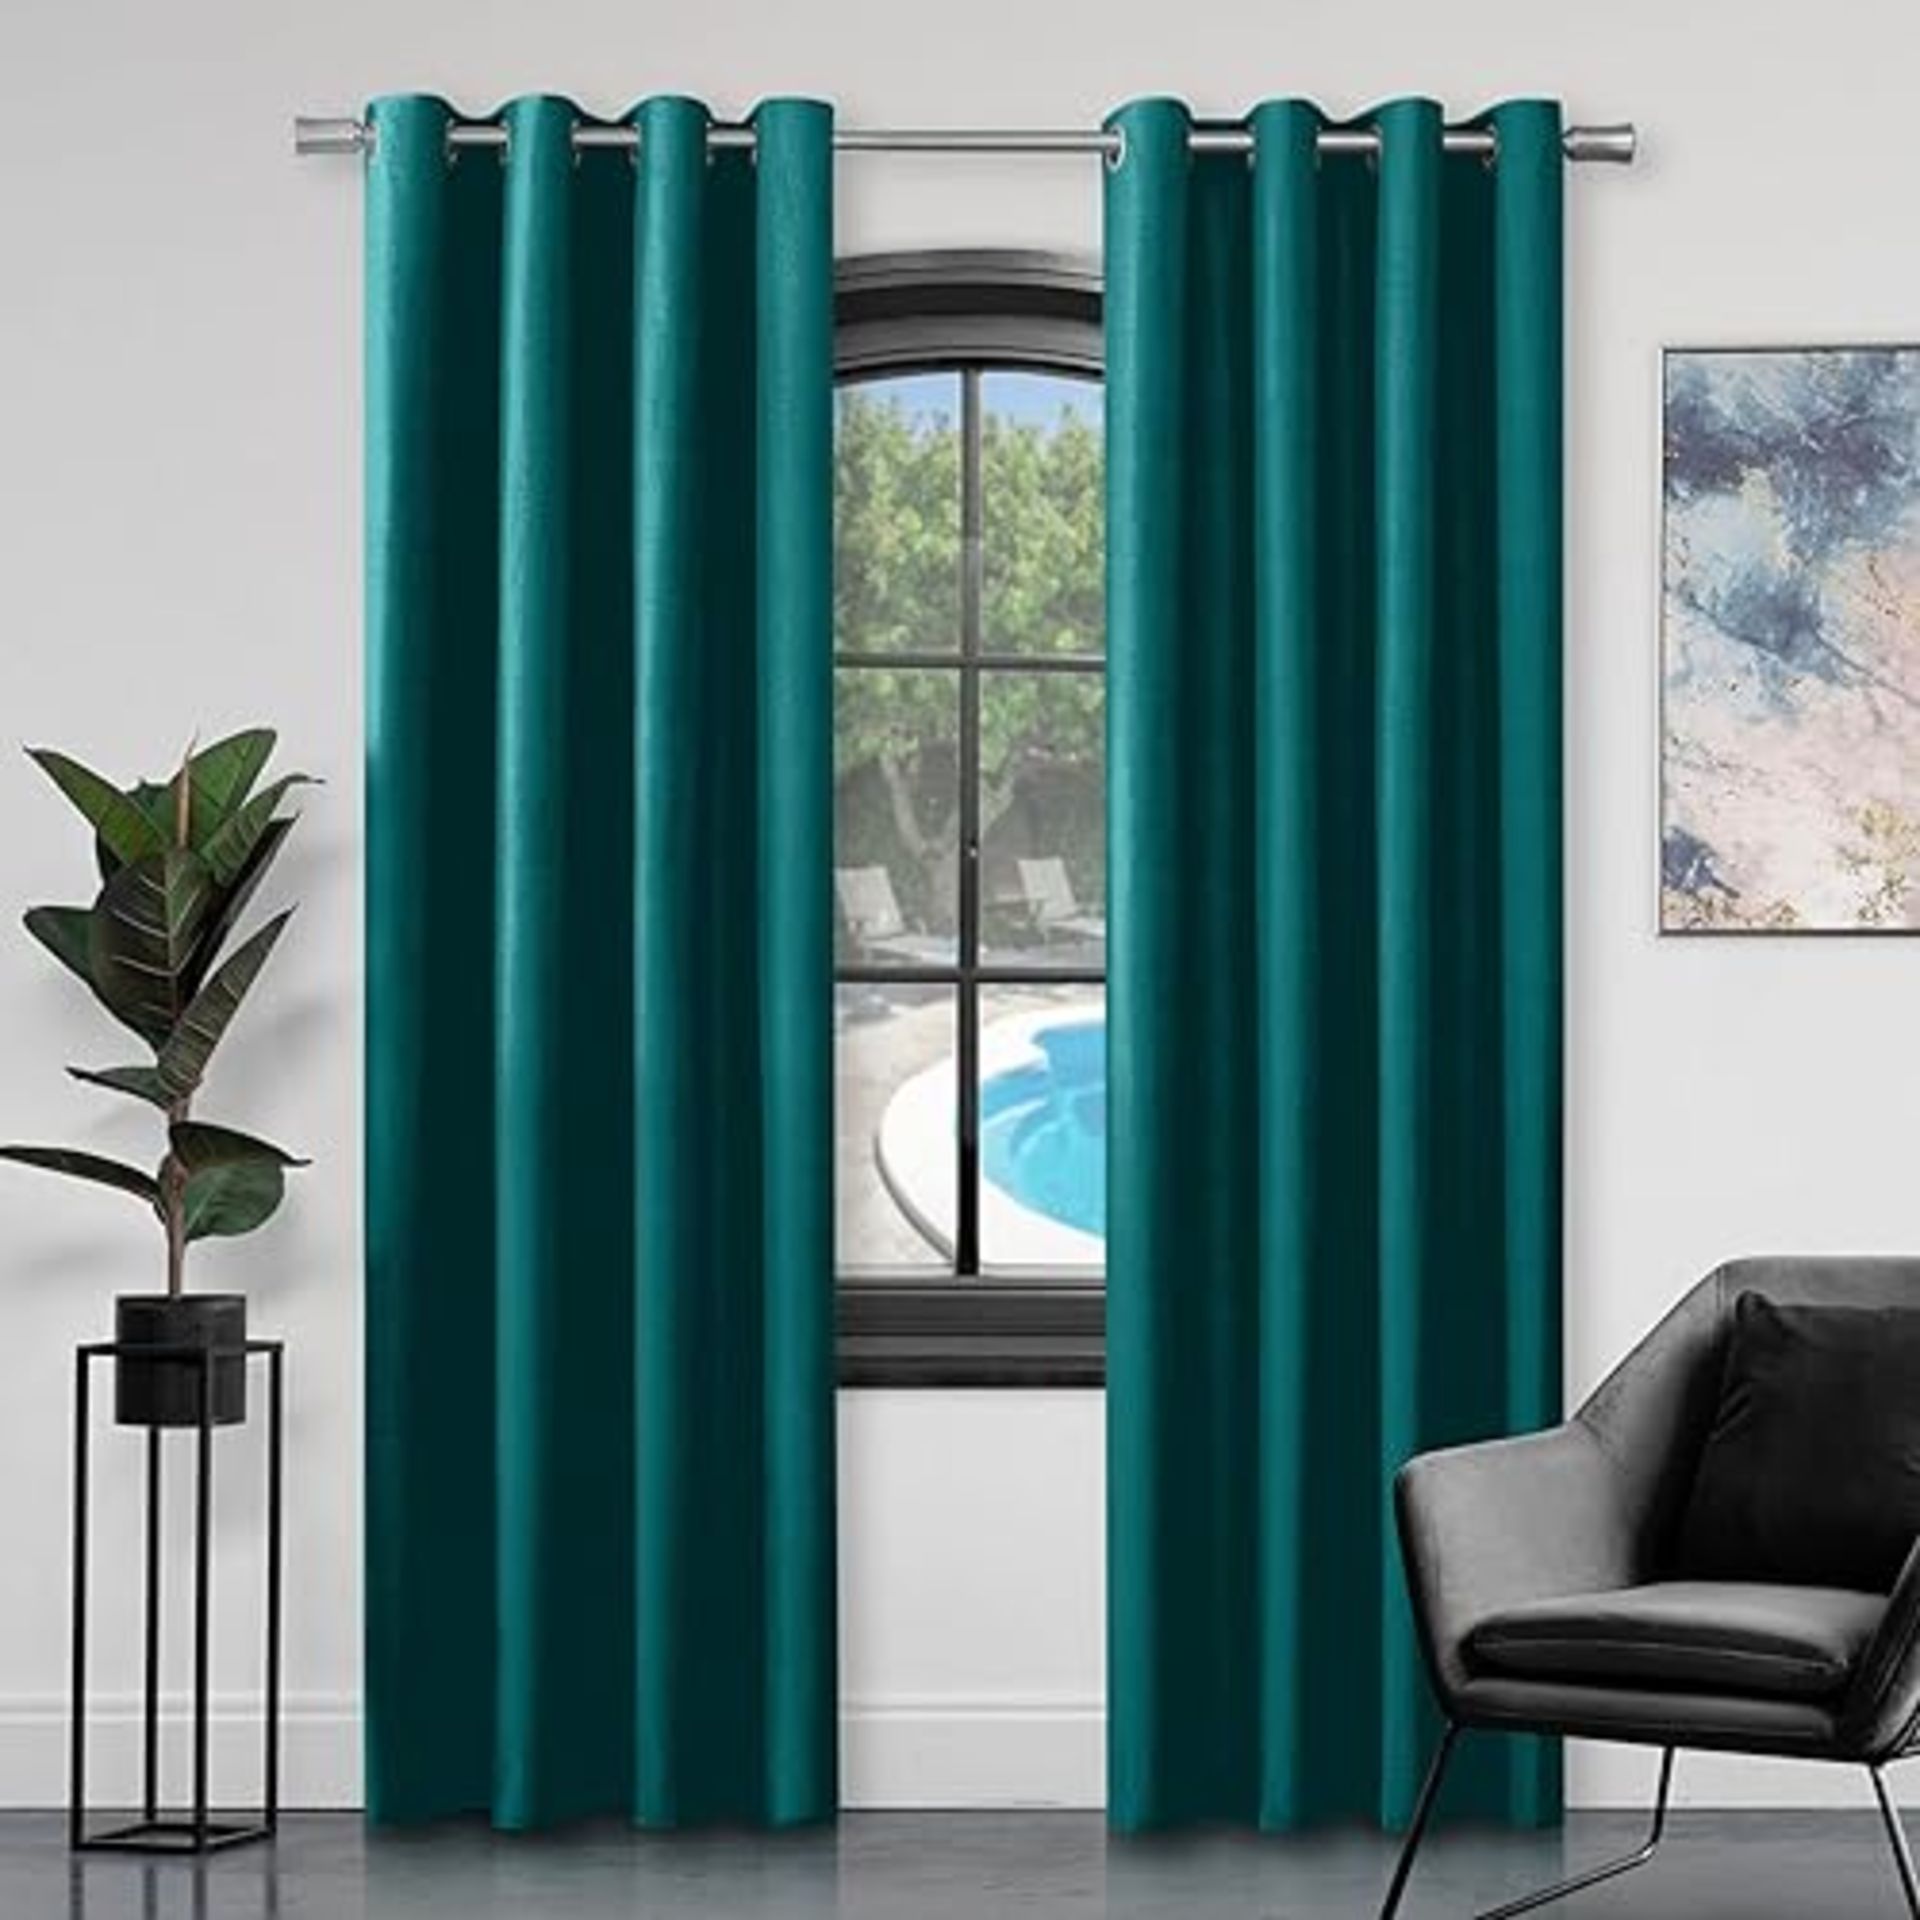 GC Gaveno Cavailia Faux Silk Eyelet Curtains For Living Room, 100% Polyester Ring Top Fully Lined...